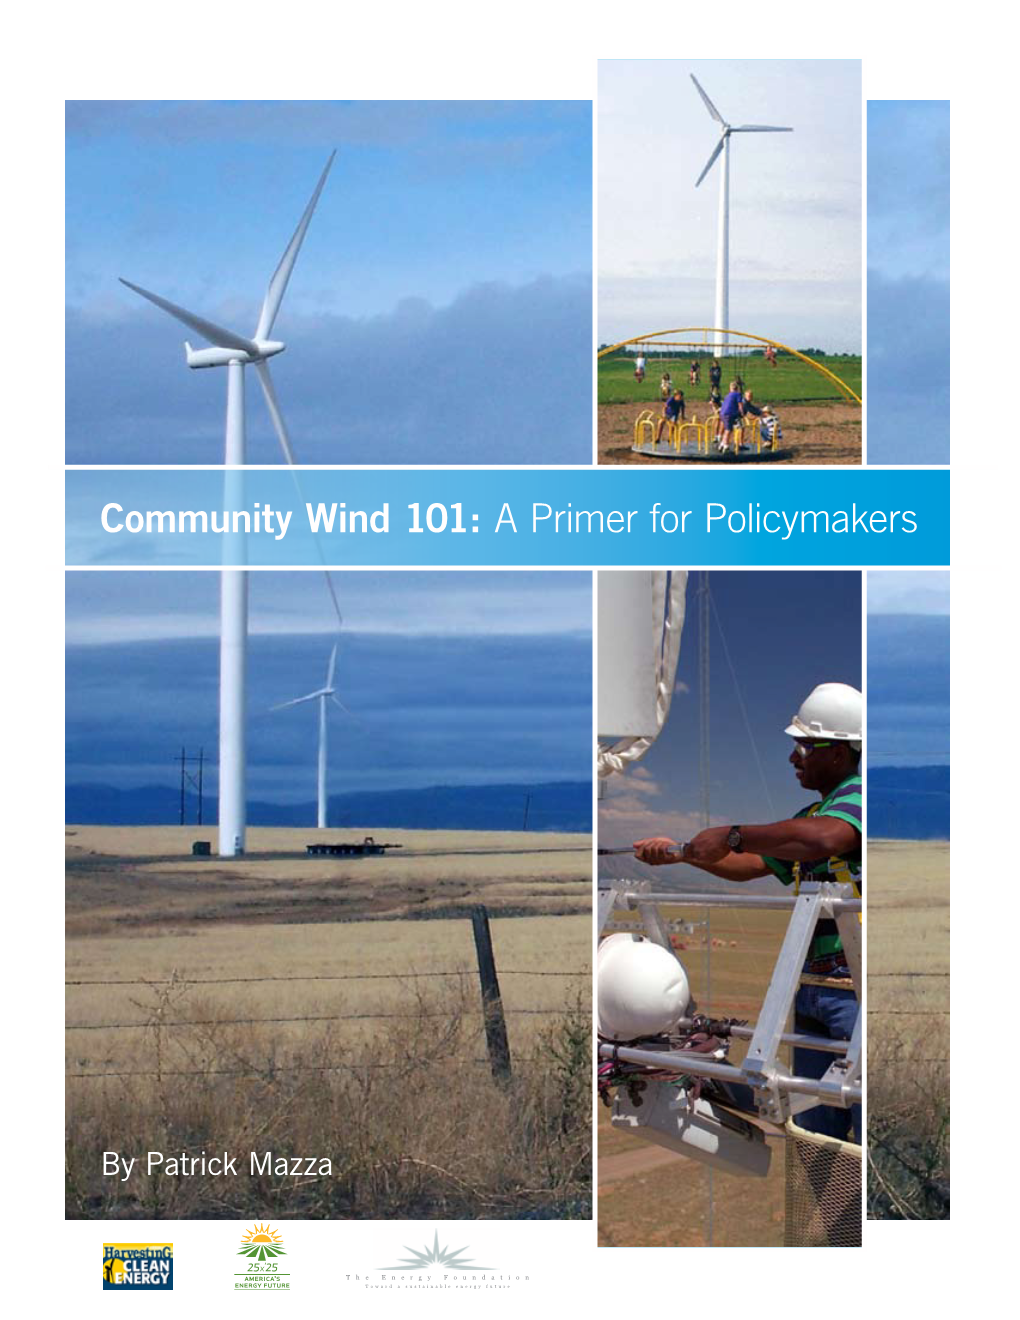 Community Wind 101: a Primer for Policymakers